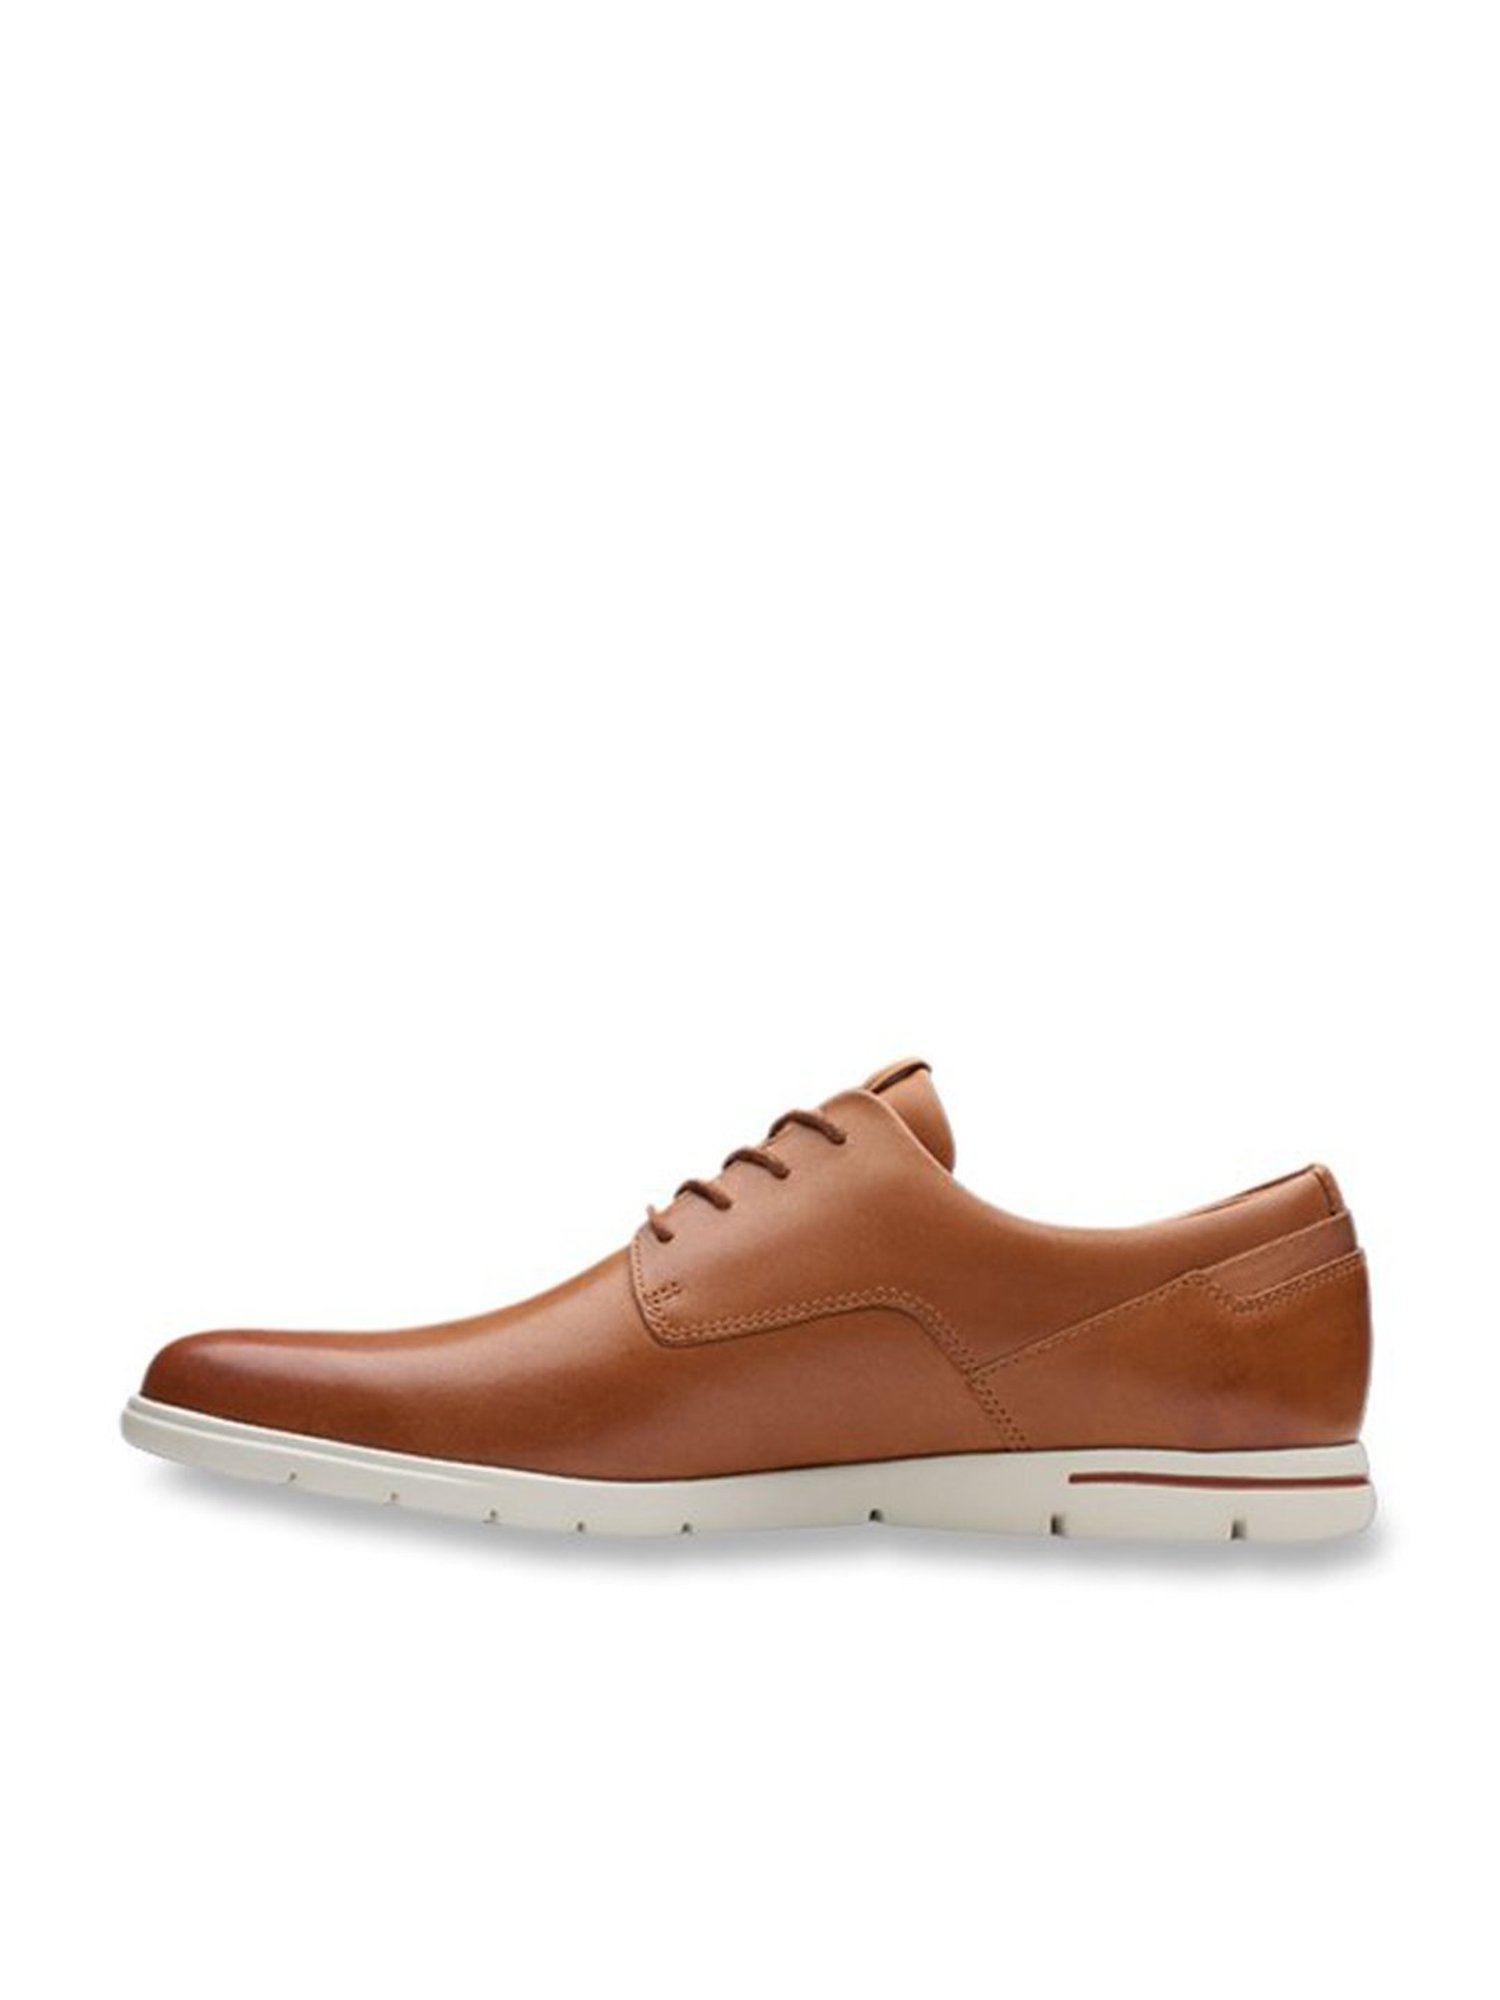 Buy Clarks Vennor Walk Derby Shoes for Men at Best Price @ Tata CLiQ